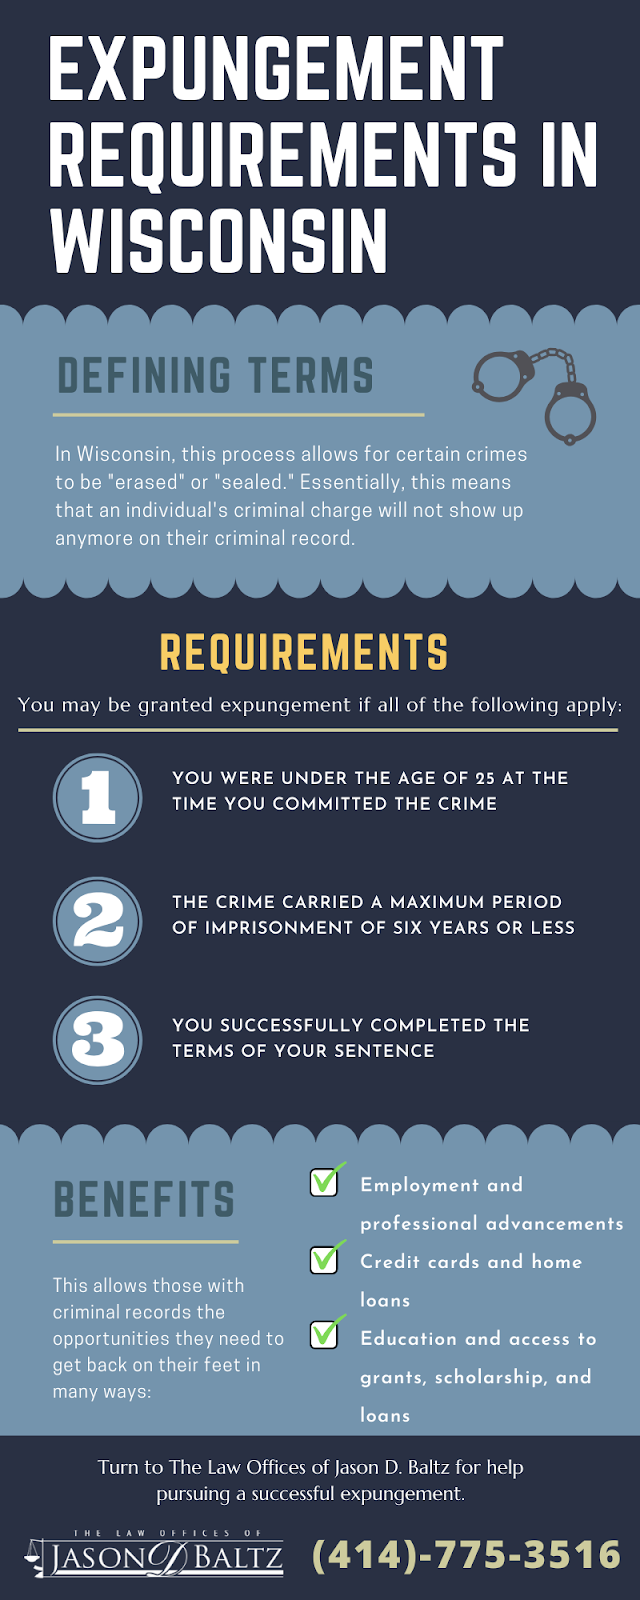 Expungement Requirements in Wisconsin